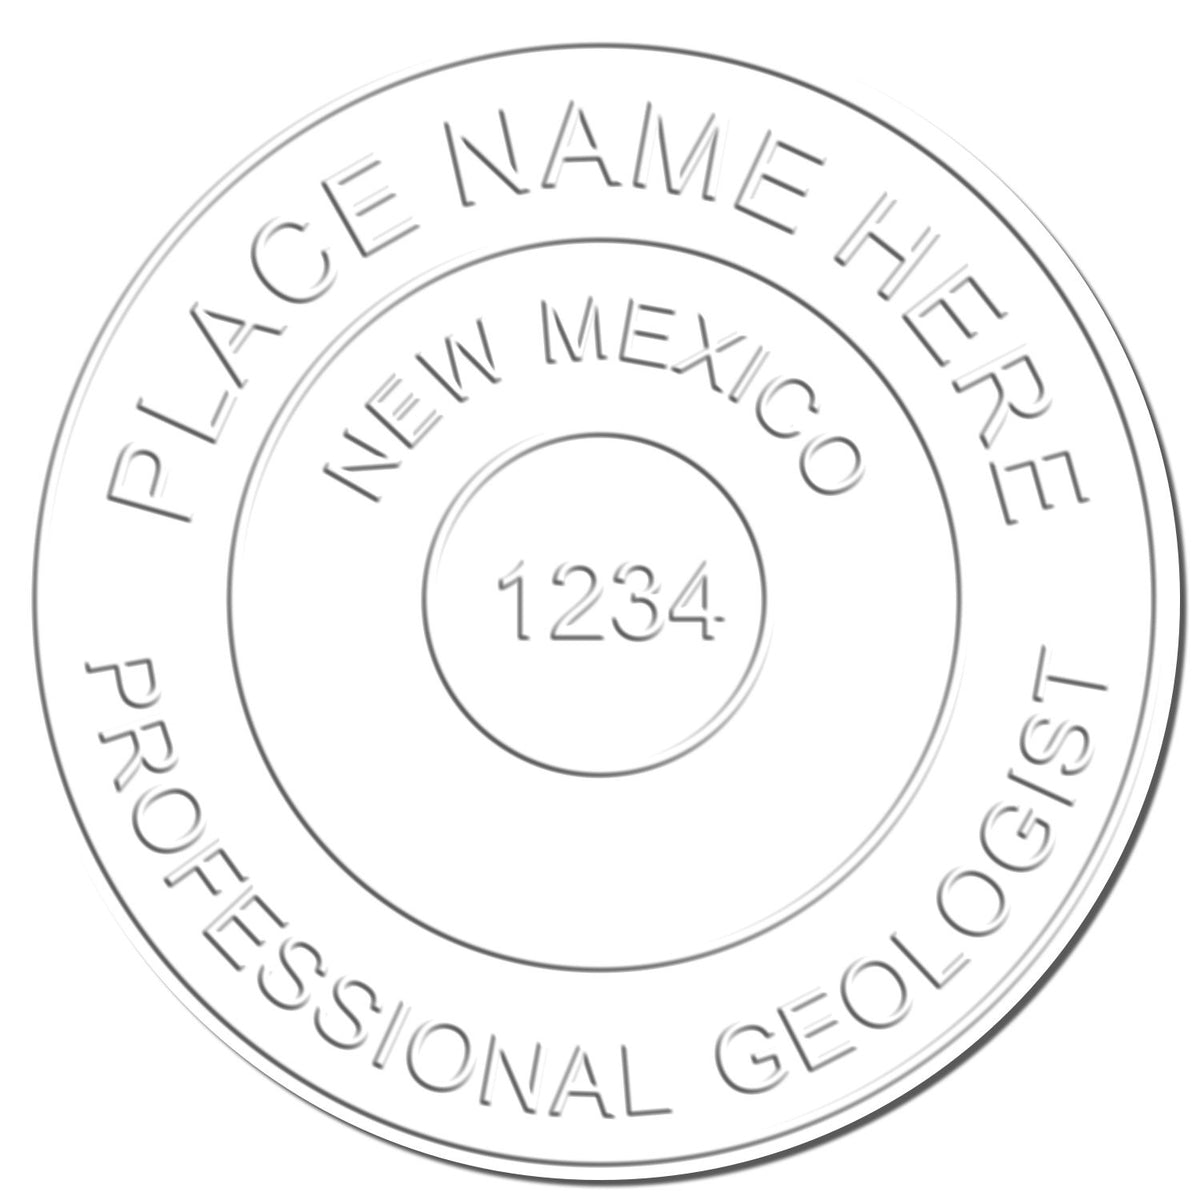 This paper is stamped with a sample imprint of the Handheld New Mexico Professional Geologist Embosser, signifying its quality and reliability.